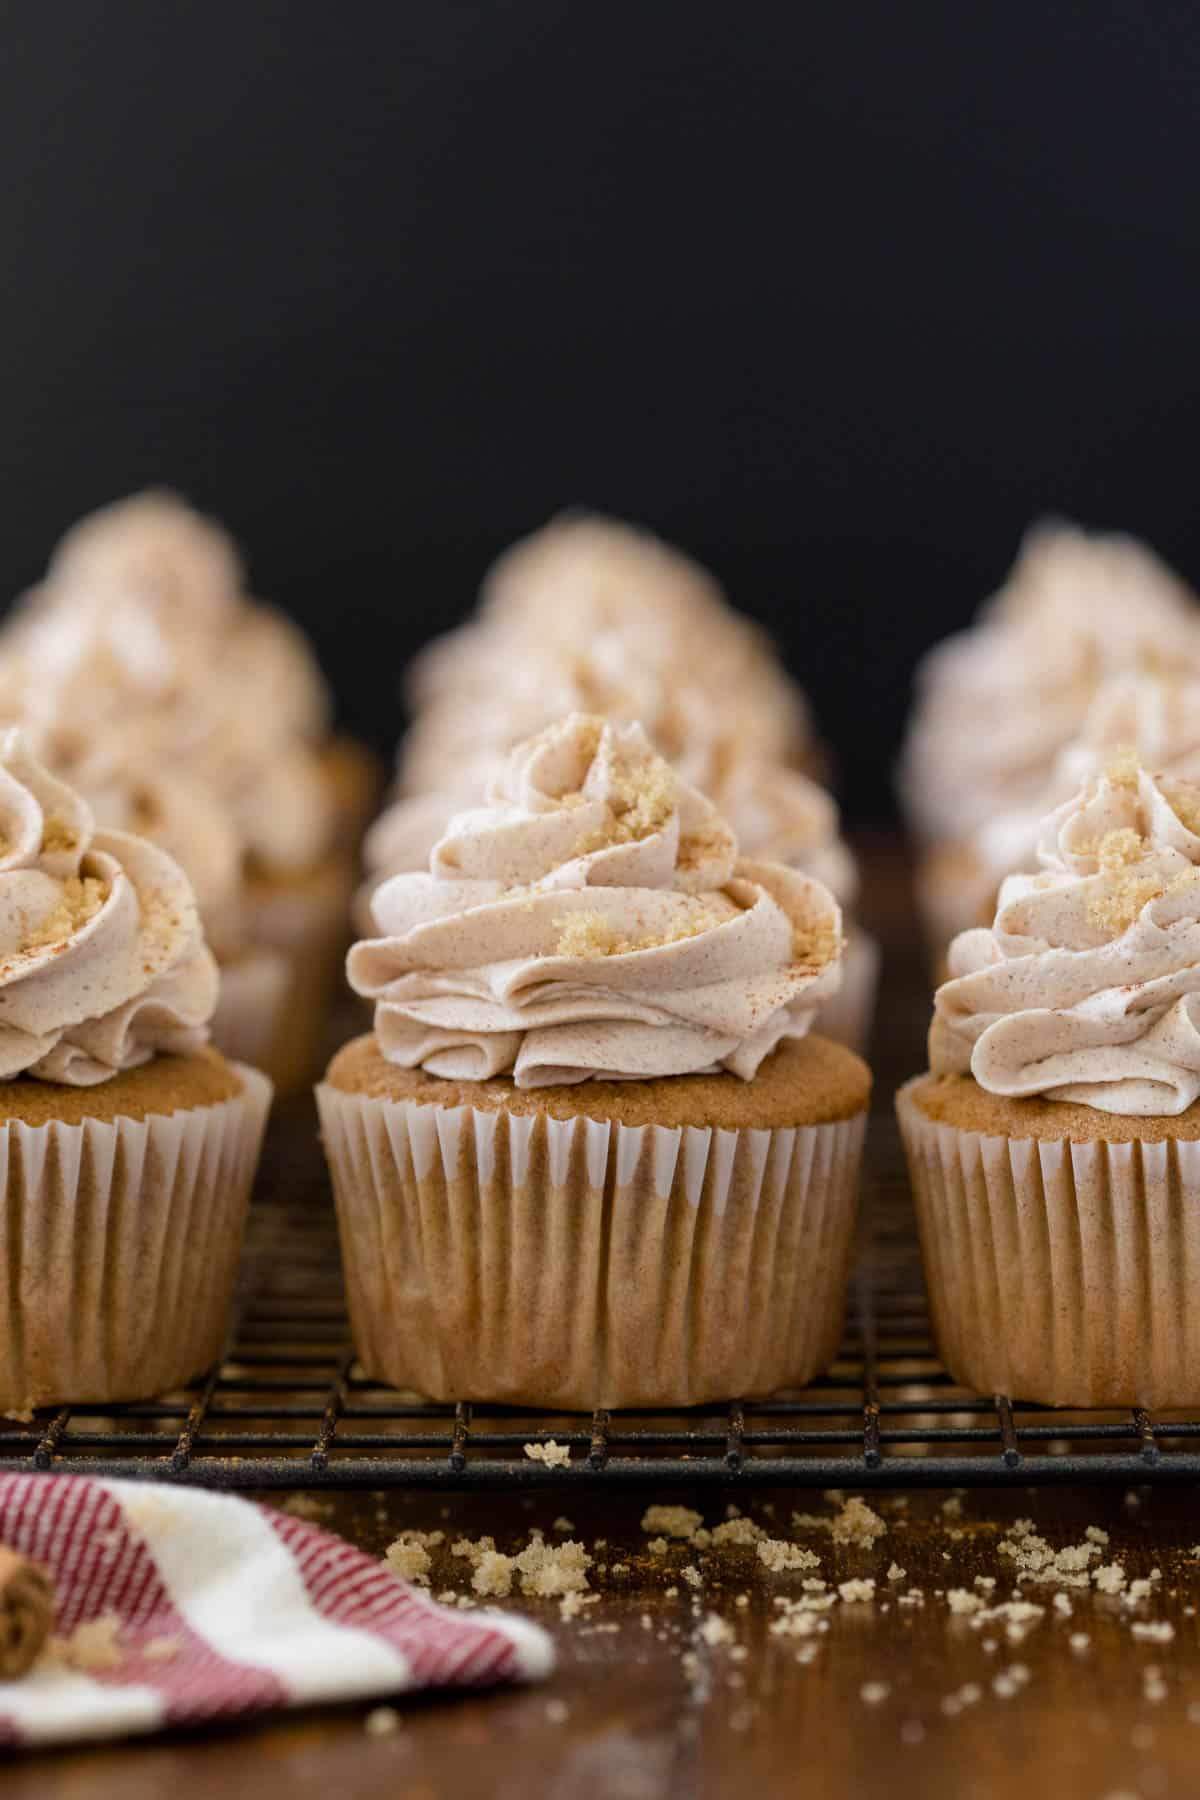 Snickerdoodle Cupcakes - Super moist and delicious! These cupcakes pack the same cinnamon sugar punch as the famous cookies, but have the added benefit of buttercream frosting.